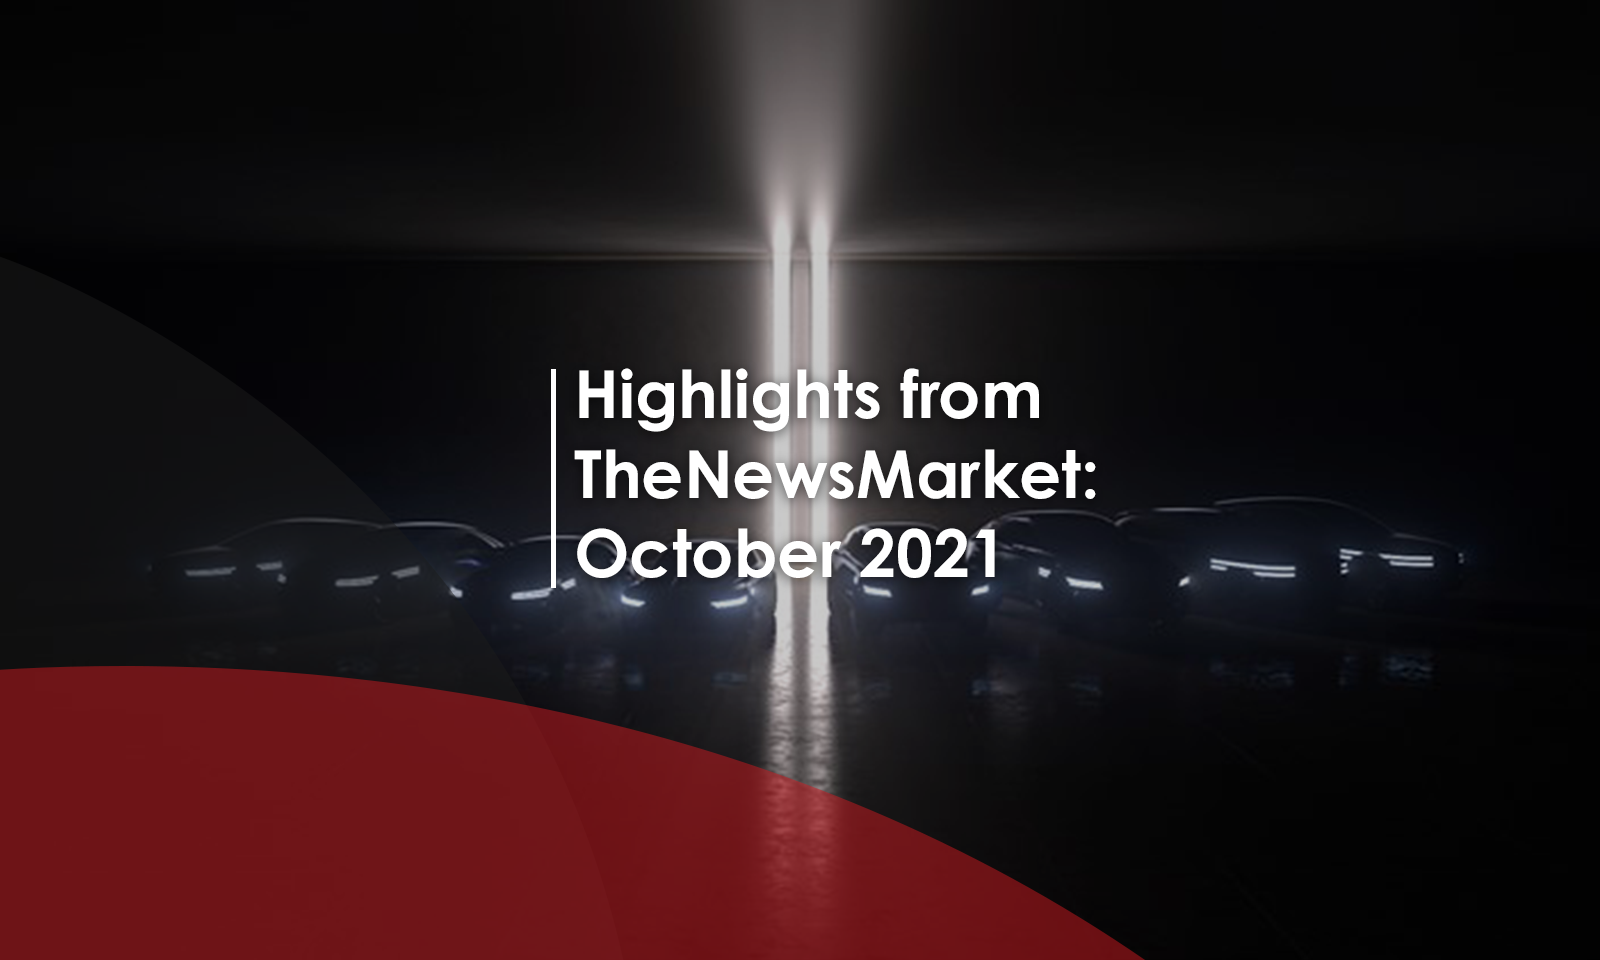 Highlights from TheNewsMarket: October 2021